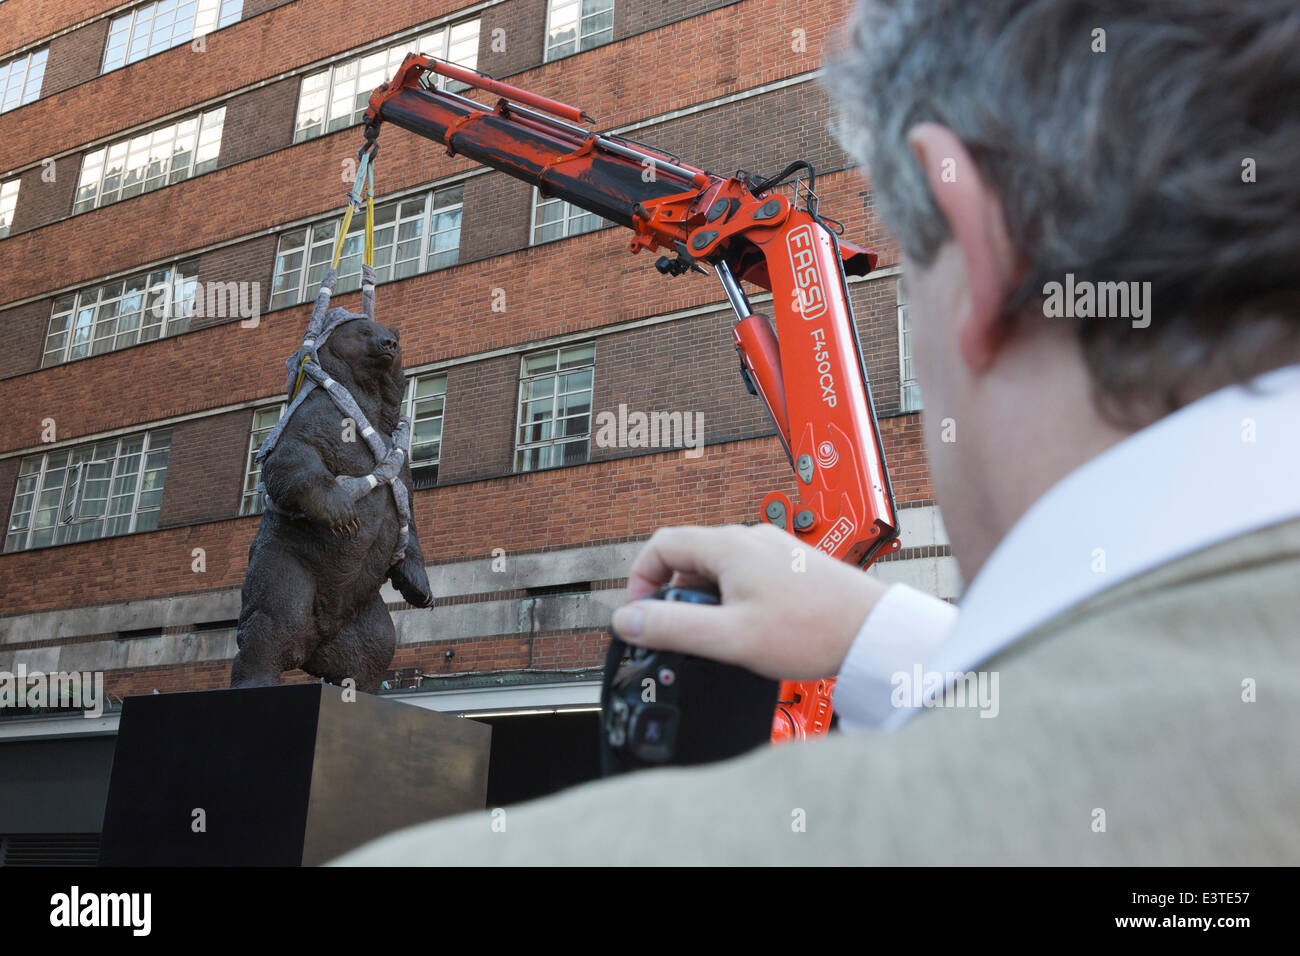 Installation of Nick Bibby's monumental bronze sculpture of Grizzly Bear 'Indomitable' in Oxford Street, London Stock Photo